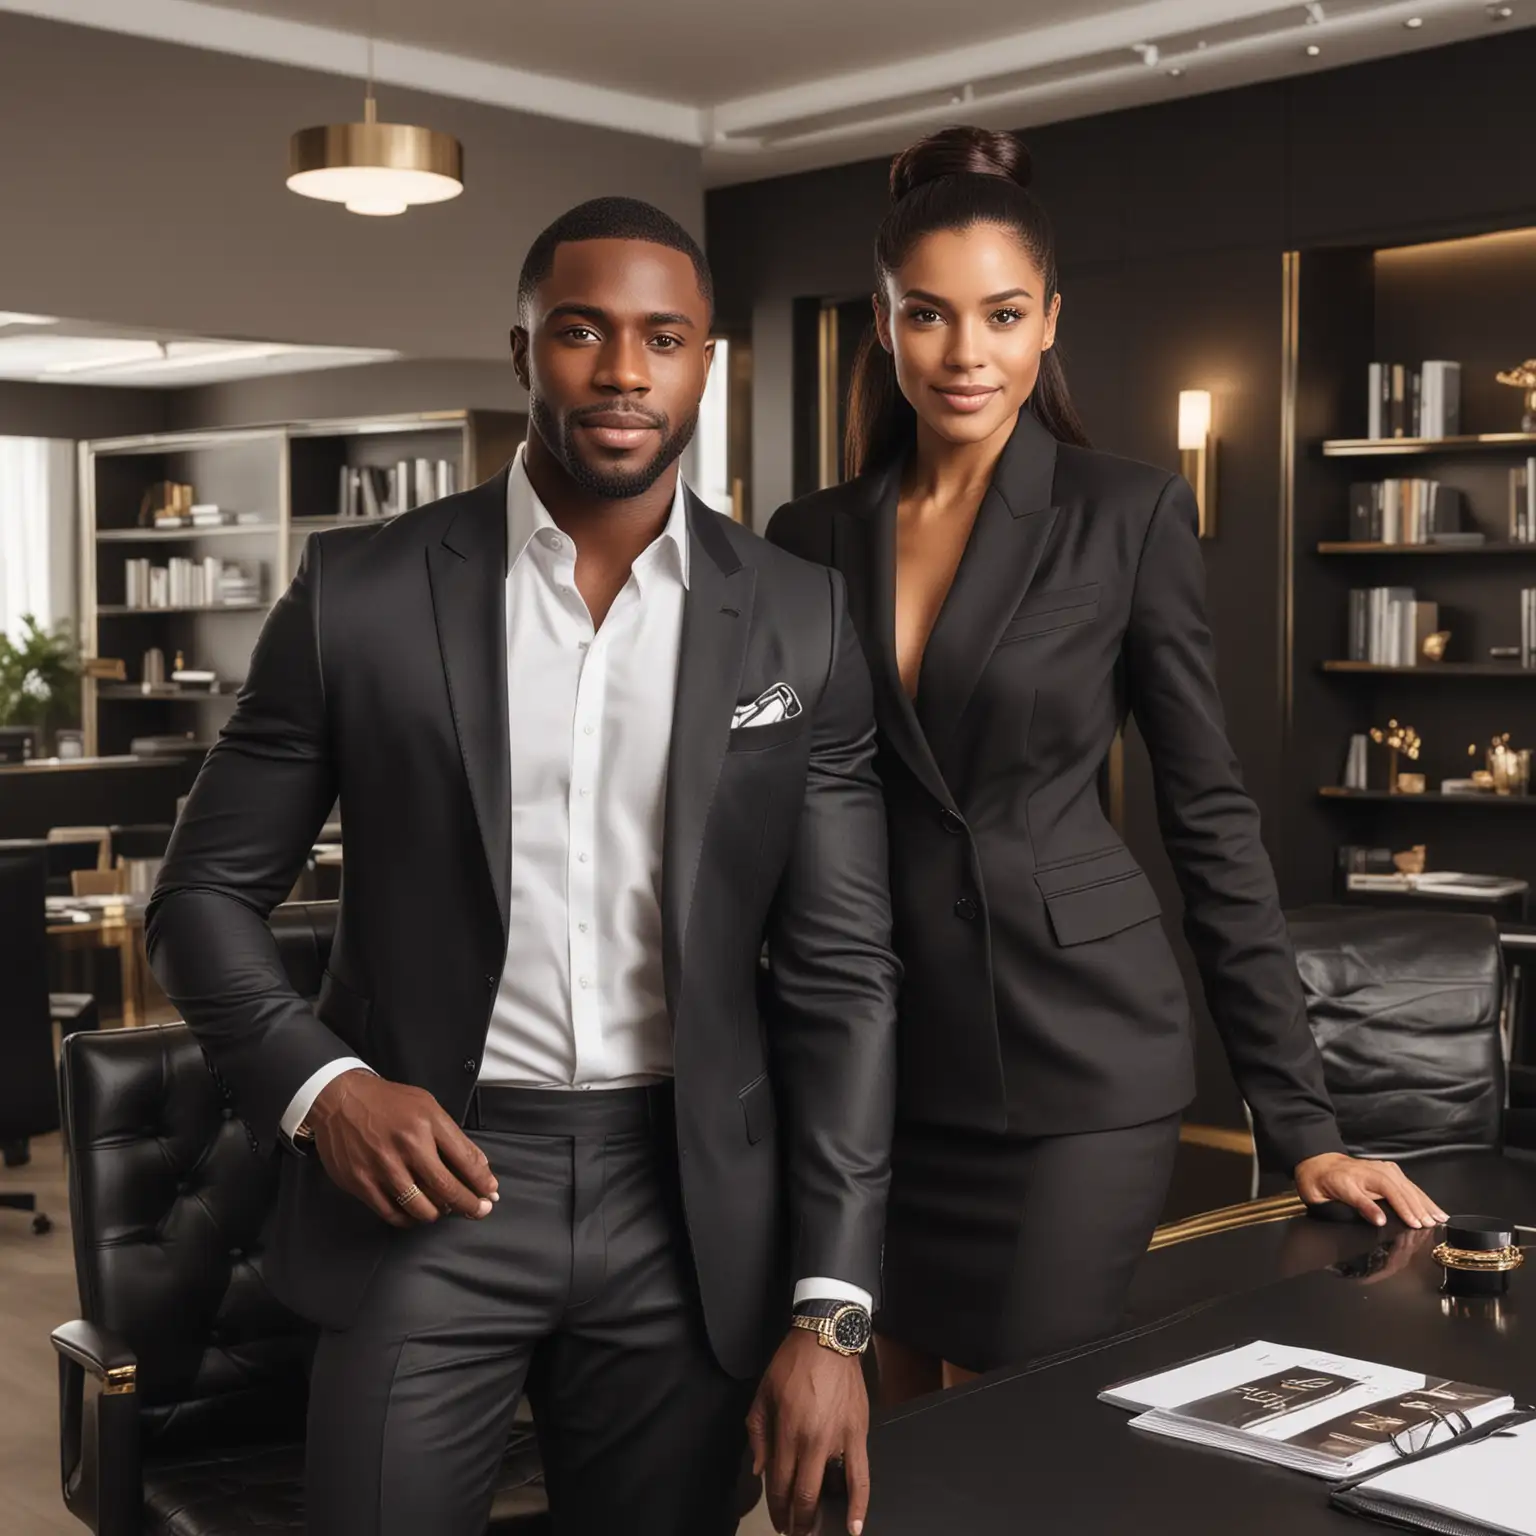 Luxury Black Man and Woman in Elegant Office Setting